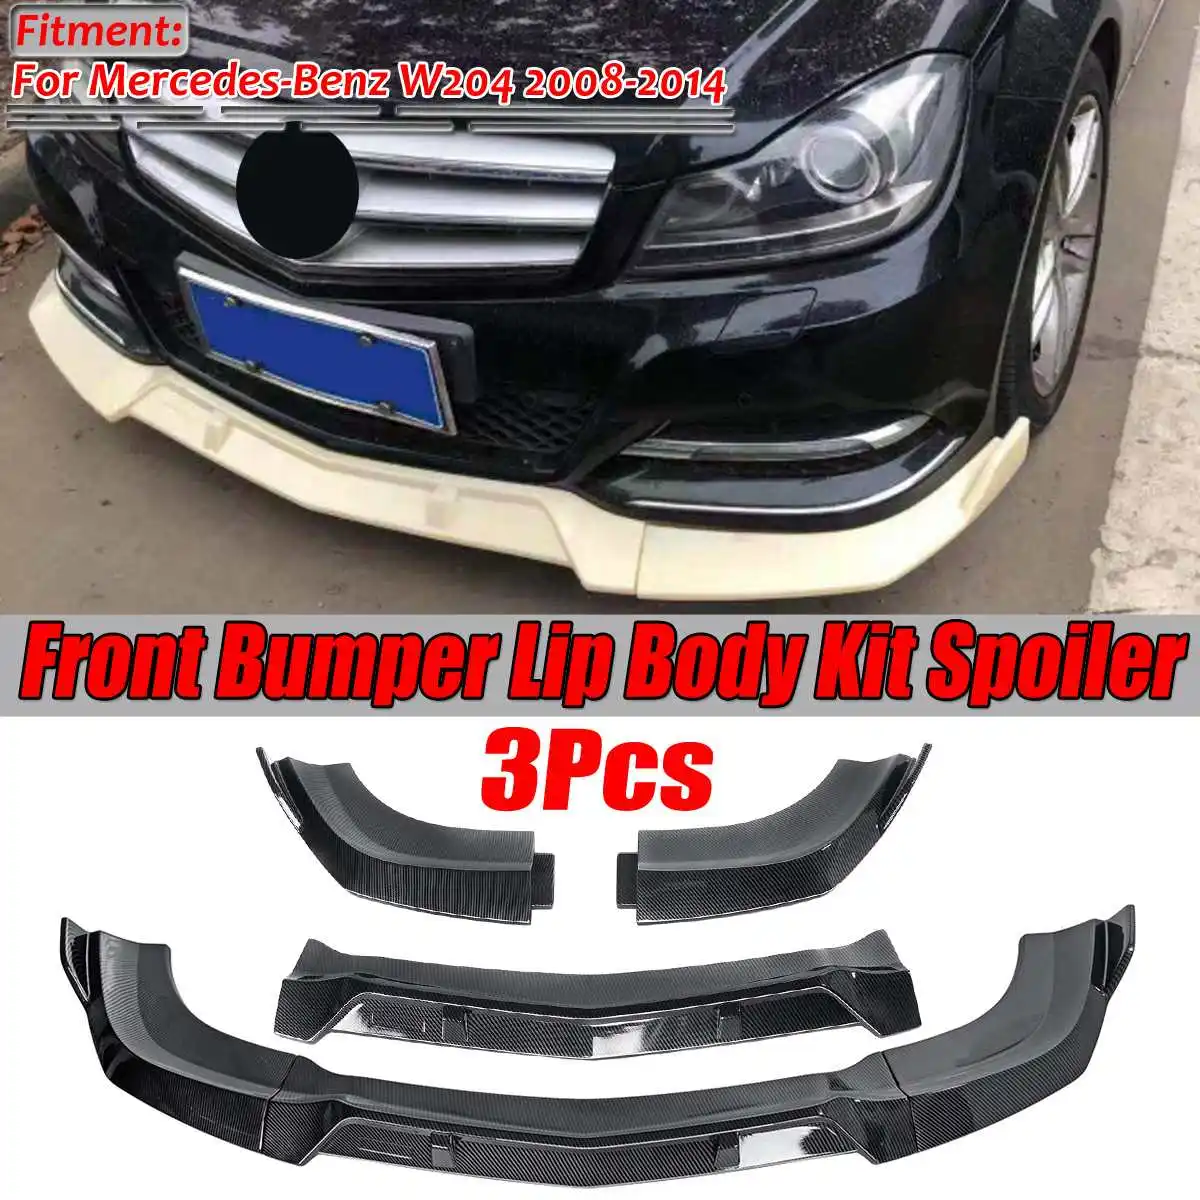 GH Style Black ABS Air Dam Chin Diffuser Spoiler Body Kit by IKON MOTORSPORTS Front Bumper Lip Compatible With 2008-2011 Mercedes Benz W204 C-Class 